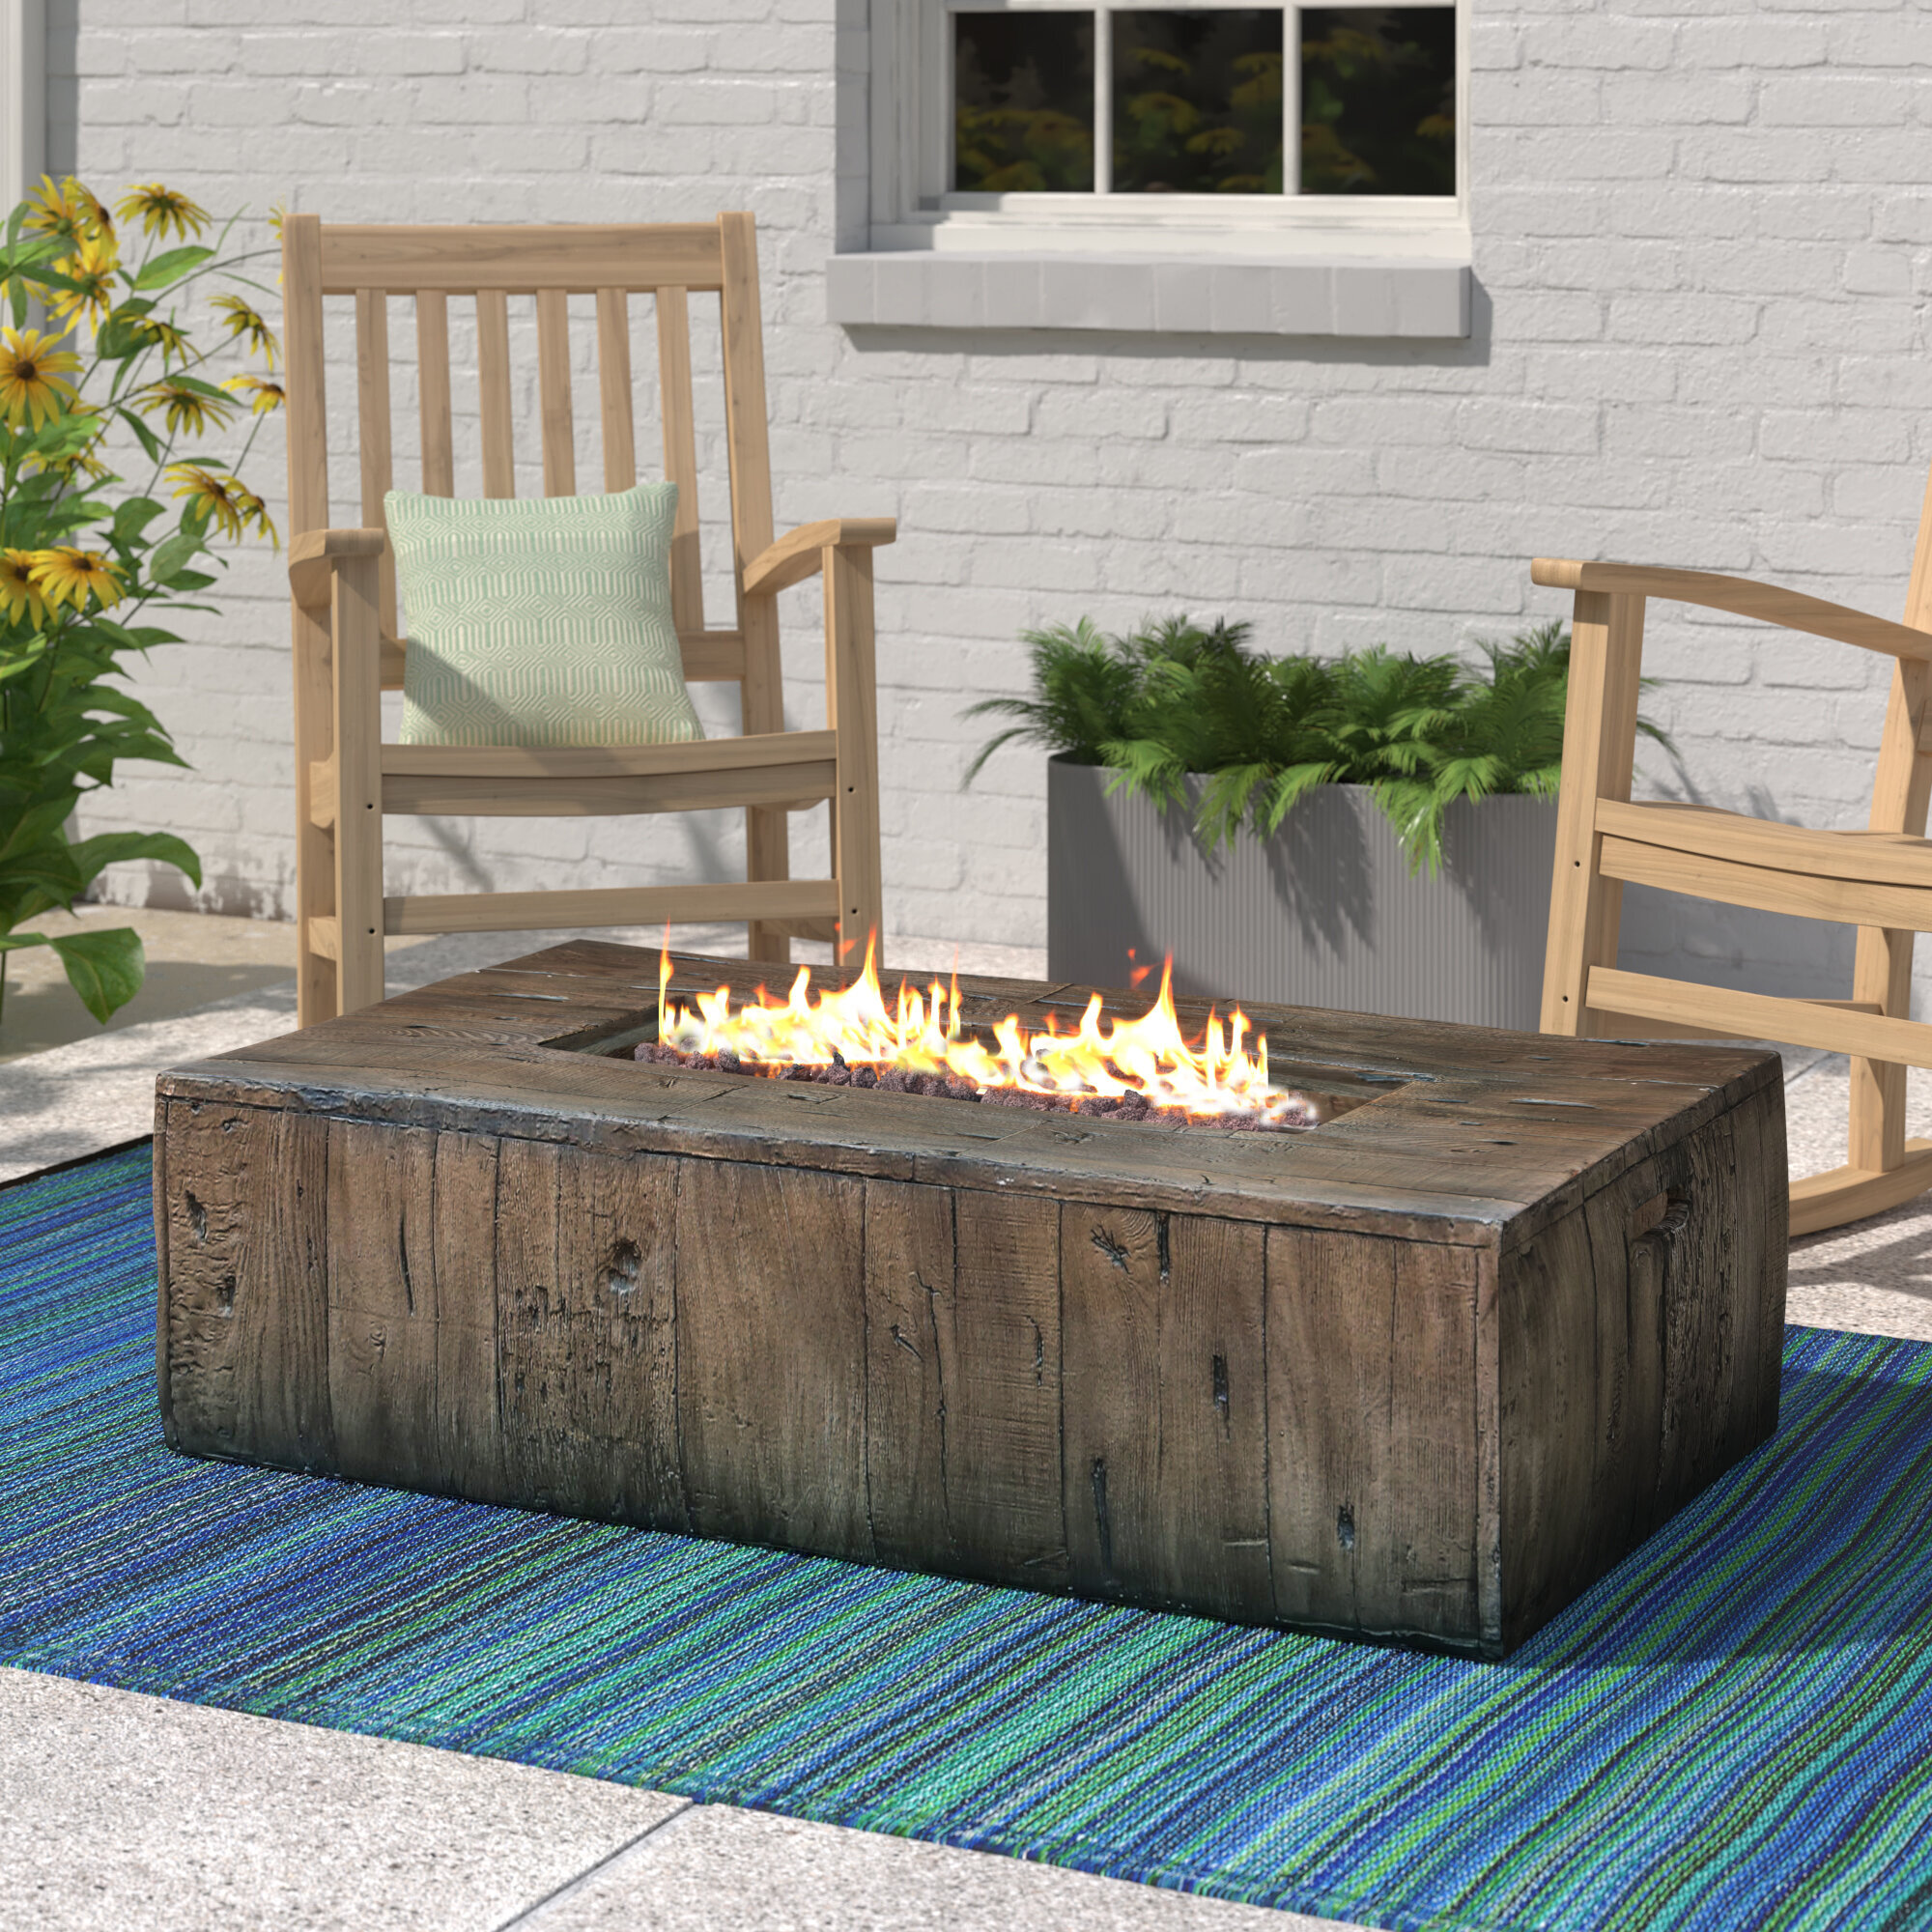 Sunnydaze Decor Brown Propane GAS Fire Pit Coffee Table with Lava Rocks - 56-Inch